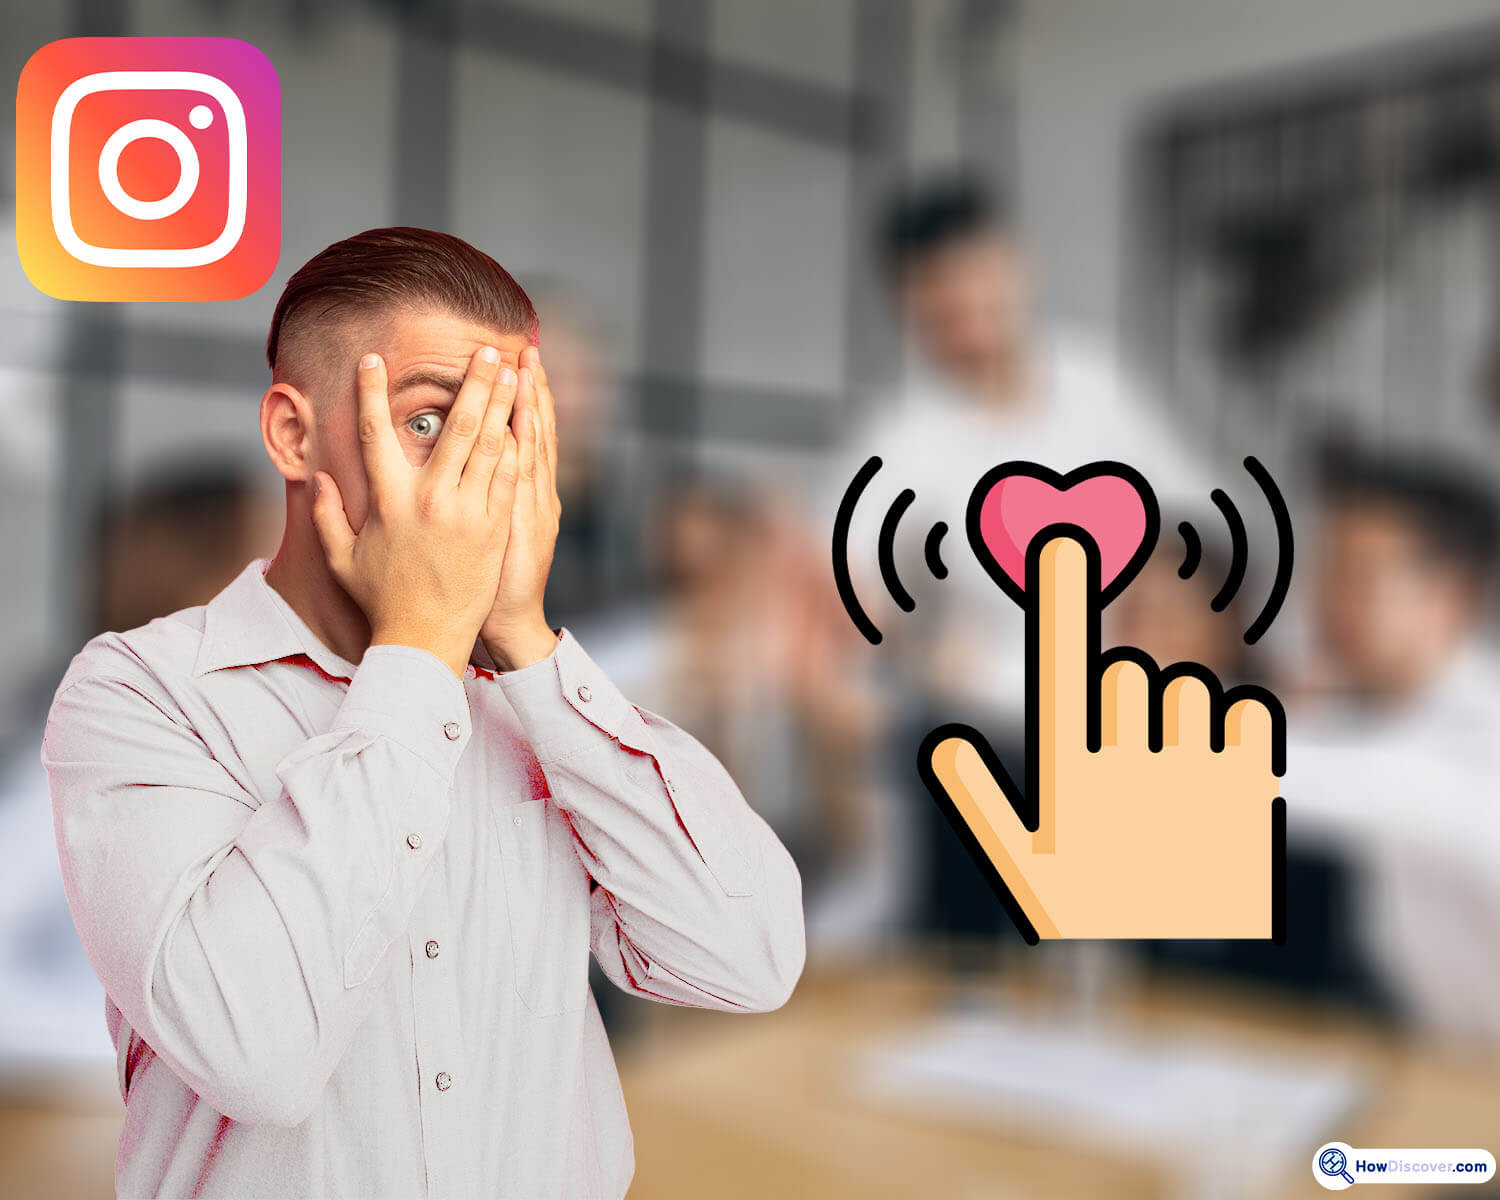 How to hide likes numbers on Instagram - How to Hide Number of Likes on Instagram